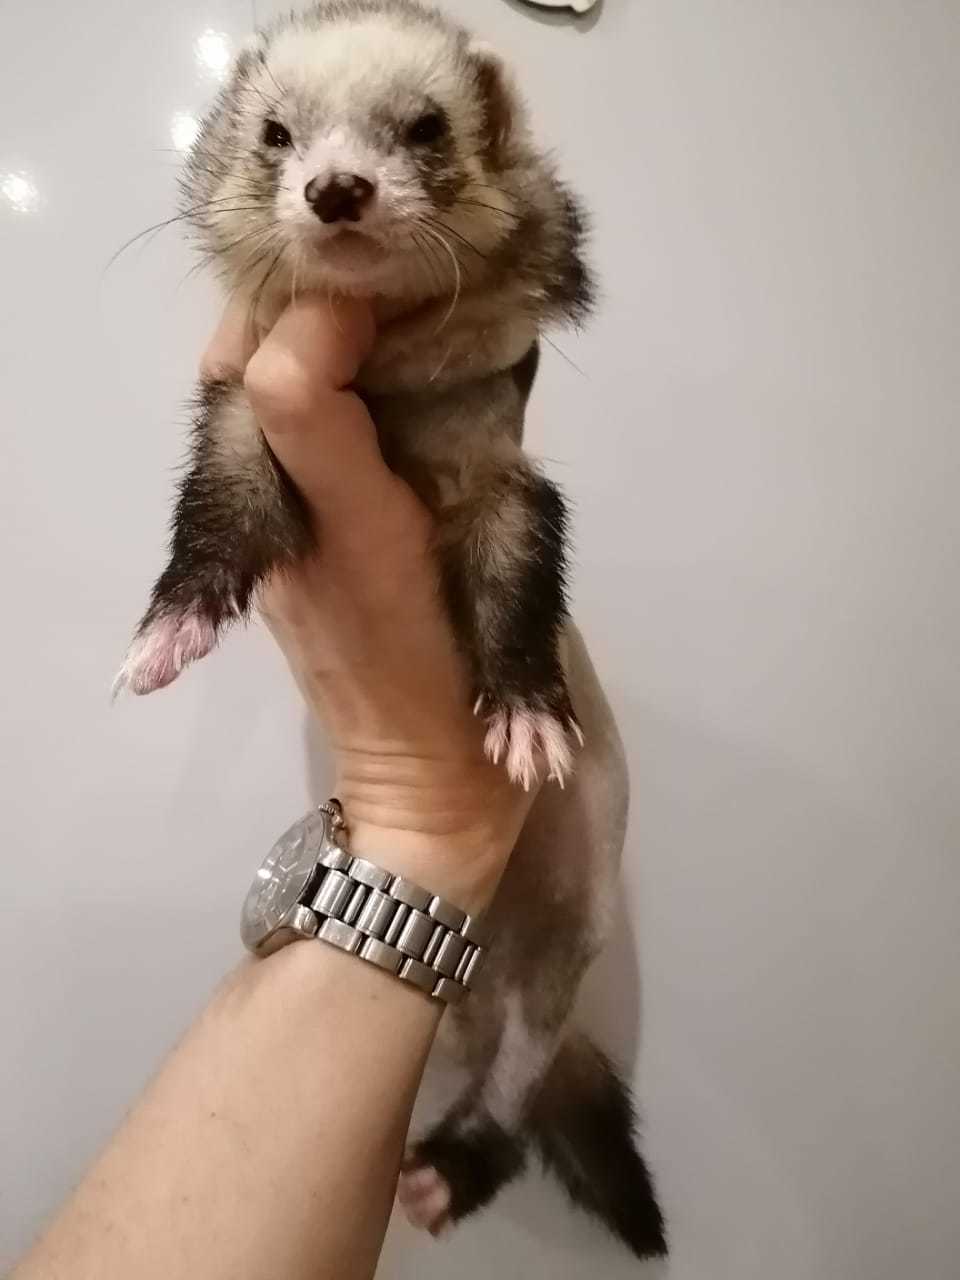 Charming Moon is in good hands! [Taken] - Ferret, Moscow, In good hands, Animal protection, No rating, Longpost, Moscow region